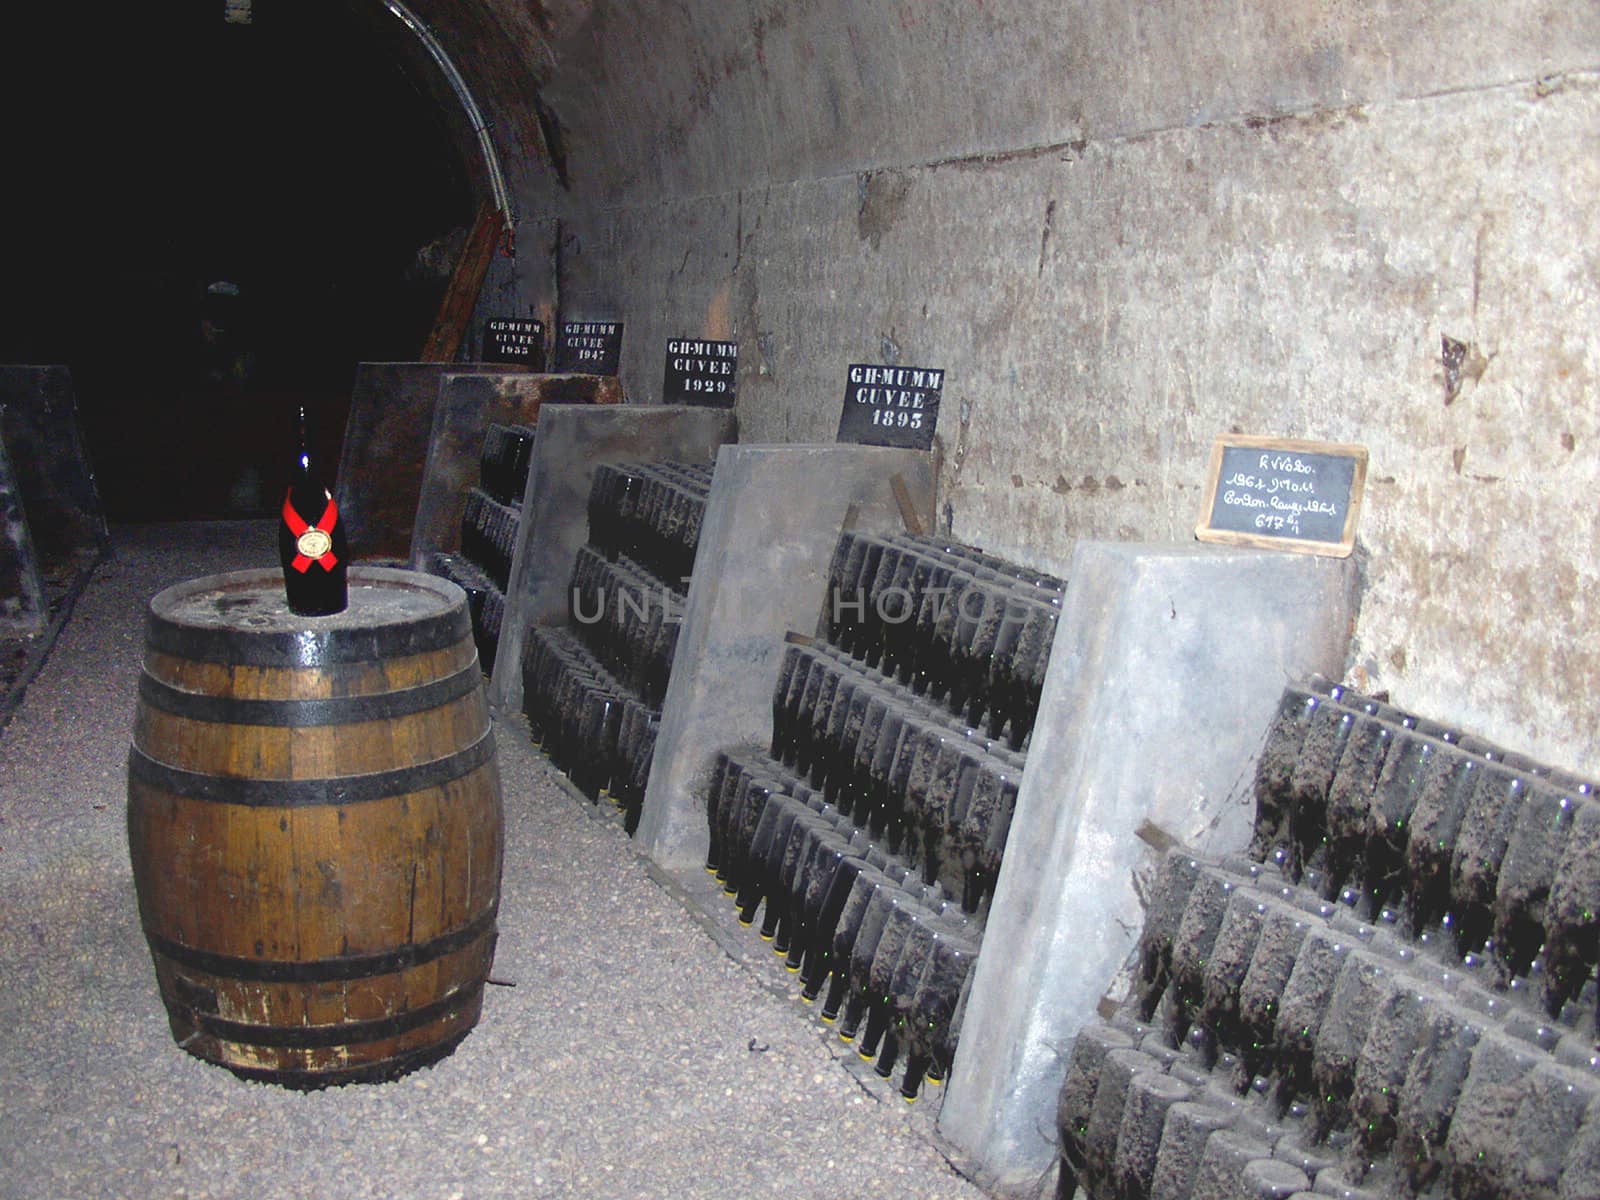 Cuvee's best century in the basement of the producer of champagne